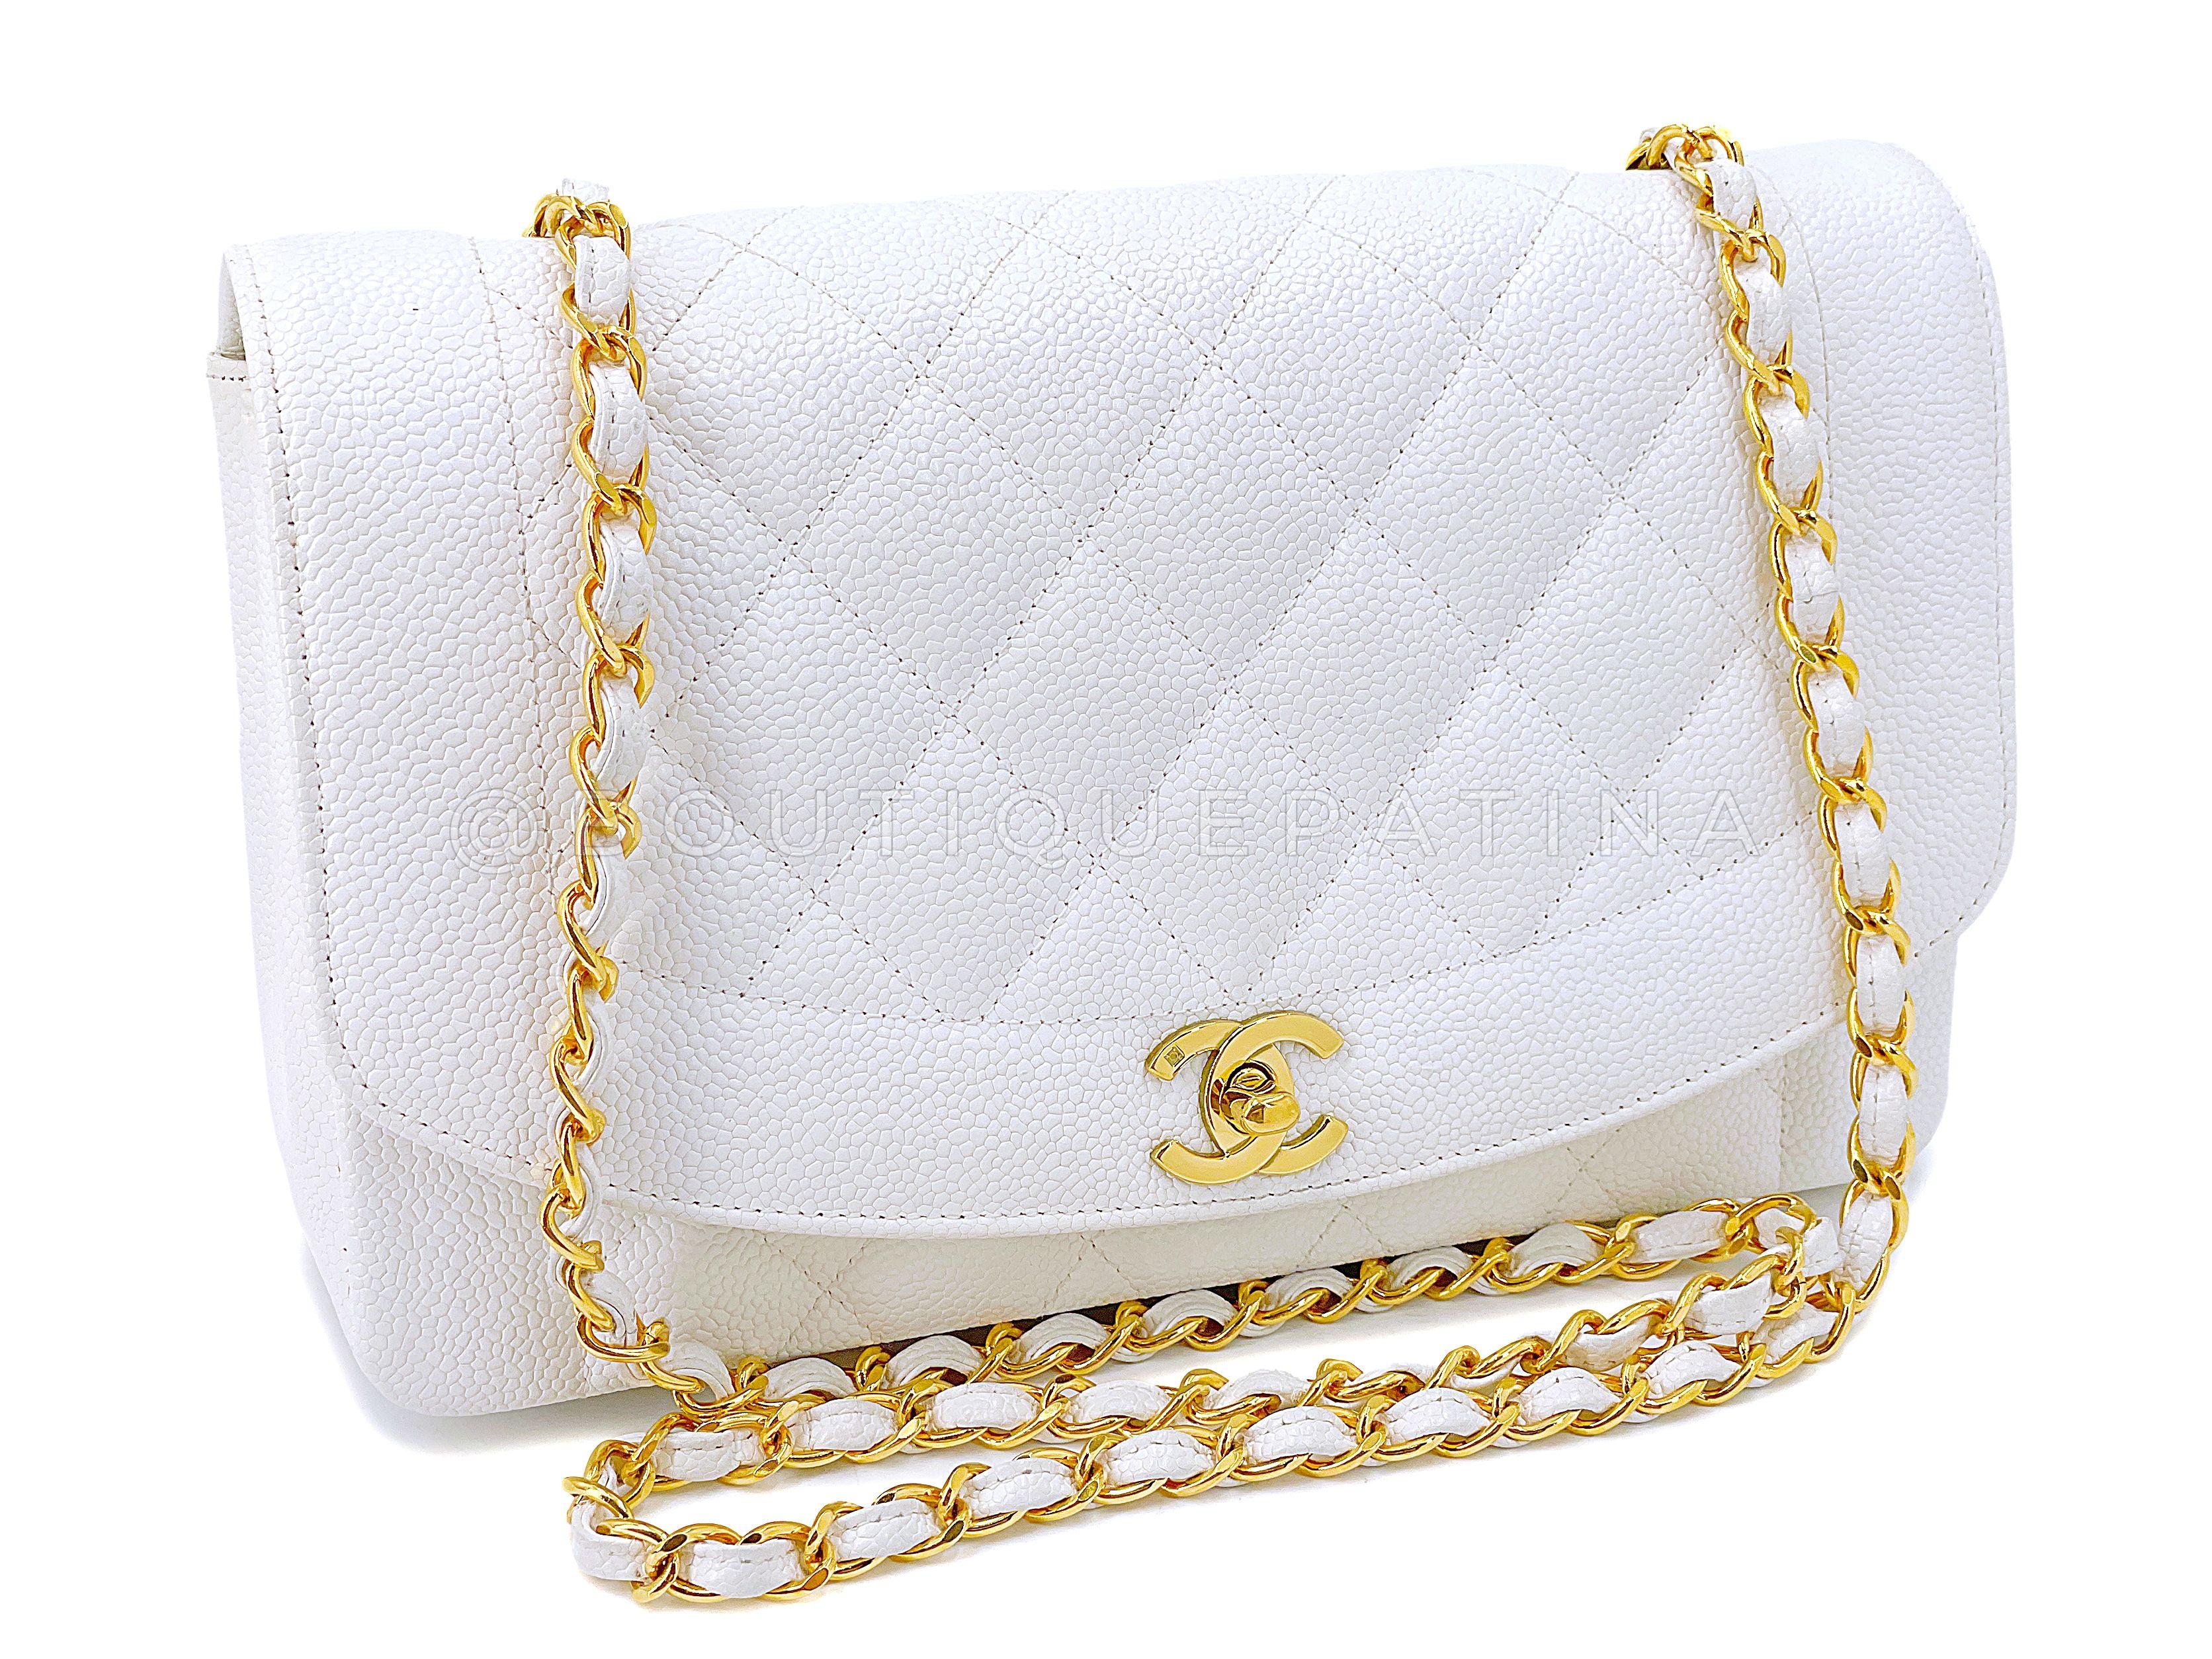 Store item: 67764
We love vintage white caviar on 24k gold plated hardware - and this Chanel Vintage 1994 White Caviar Medium Diana Flap Bag 24k GHW is no exception. The combination of the pebbled calfskin with the 24k gold plated hardware is a holy